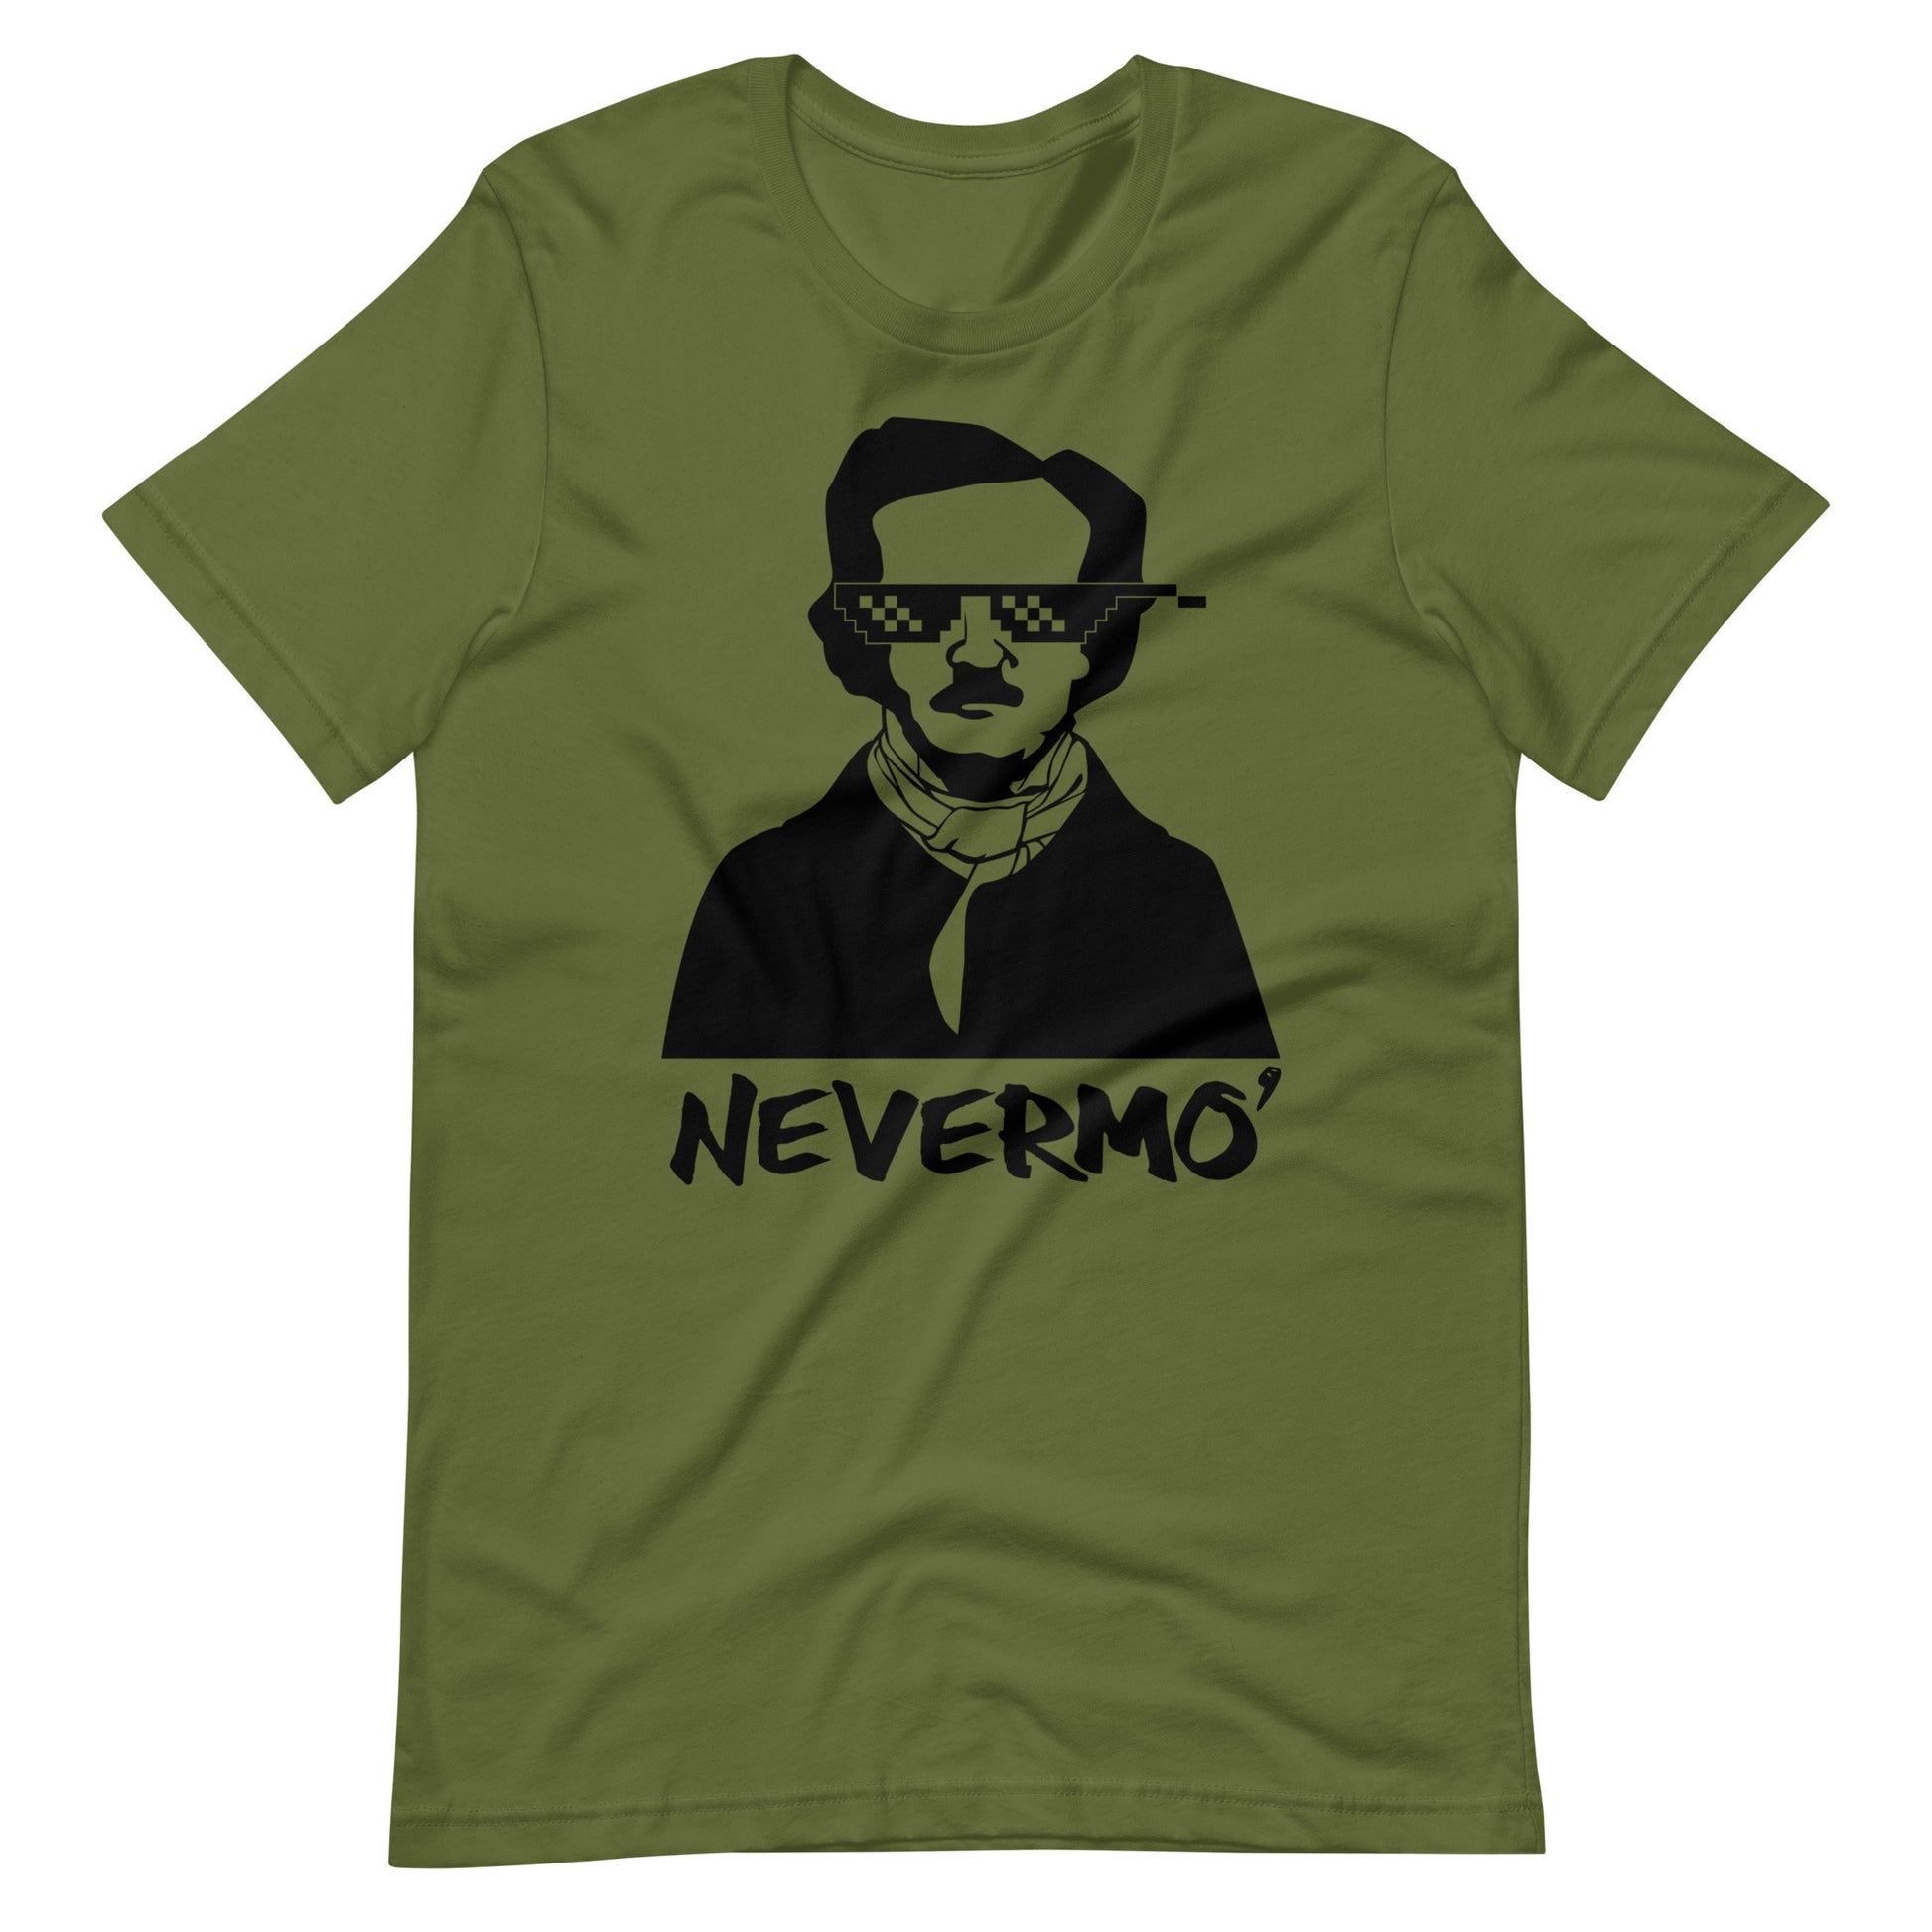 Men's Edgar Allan Poe "The Nevermo" T-Shirt - Olive Front